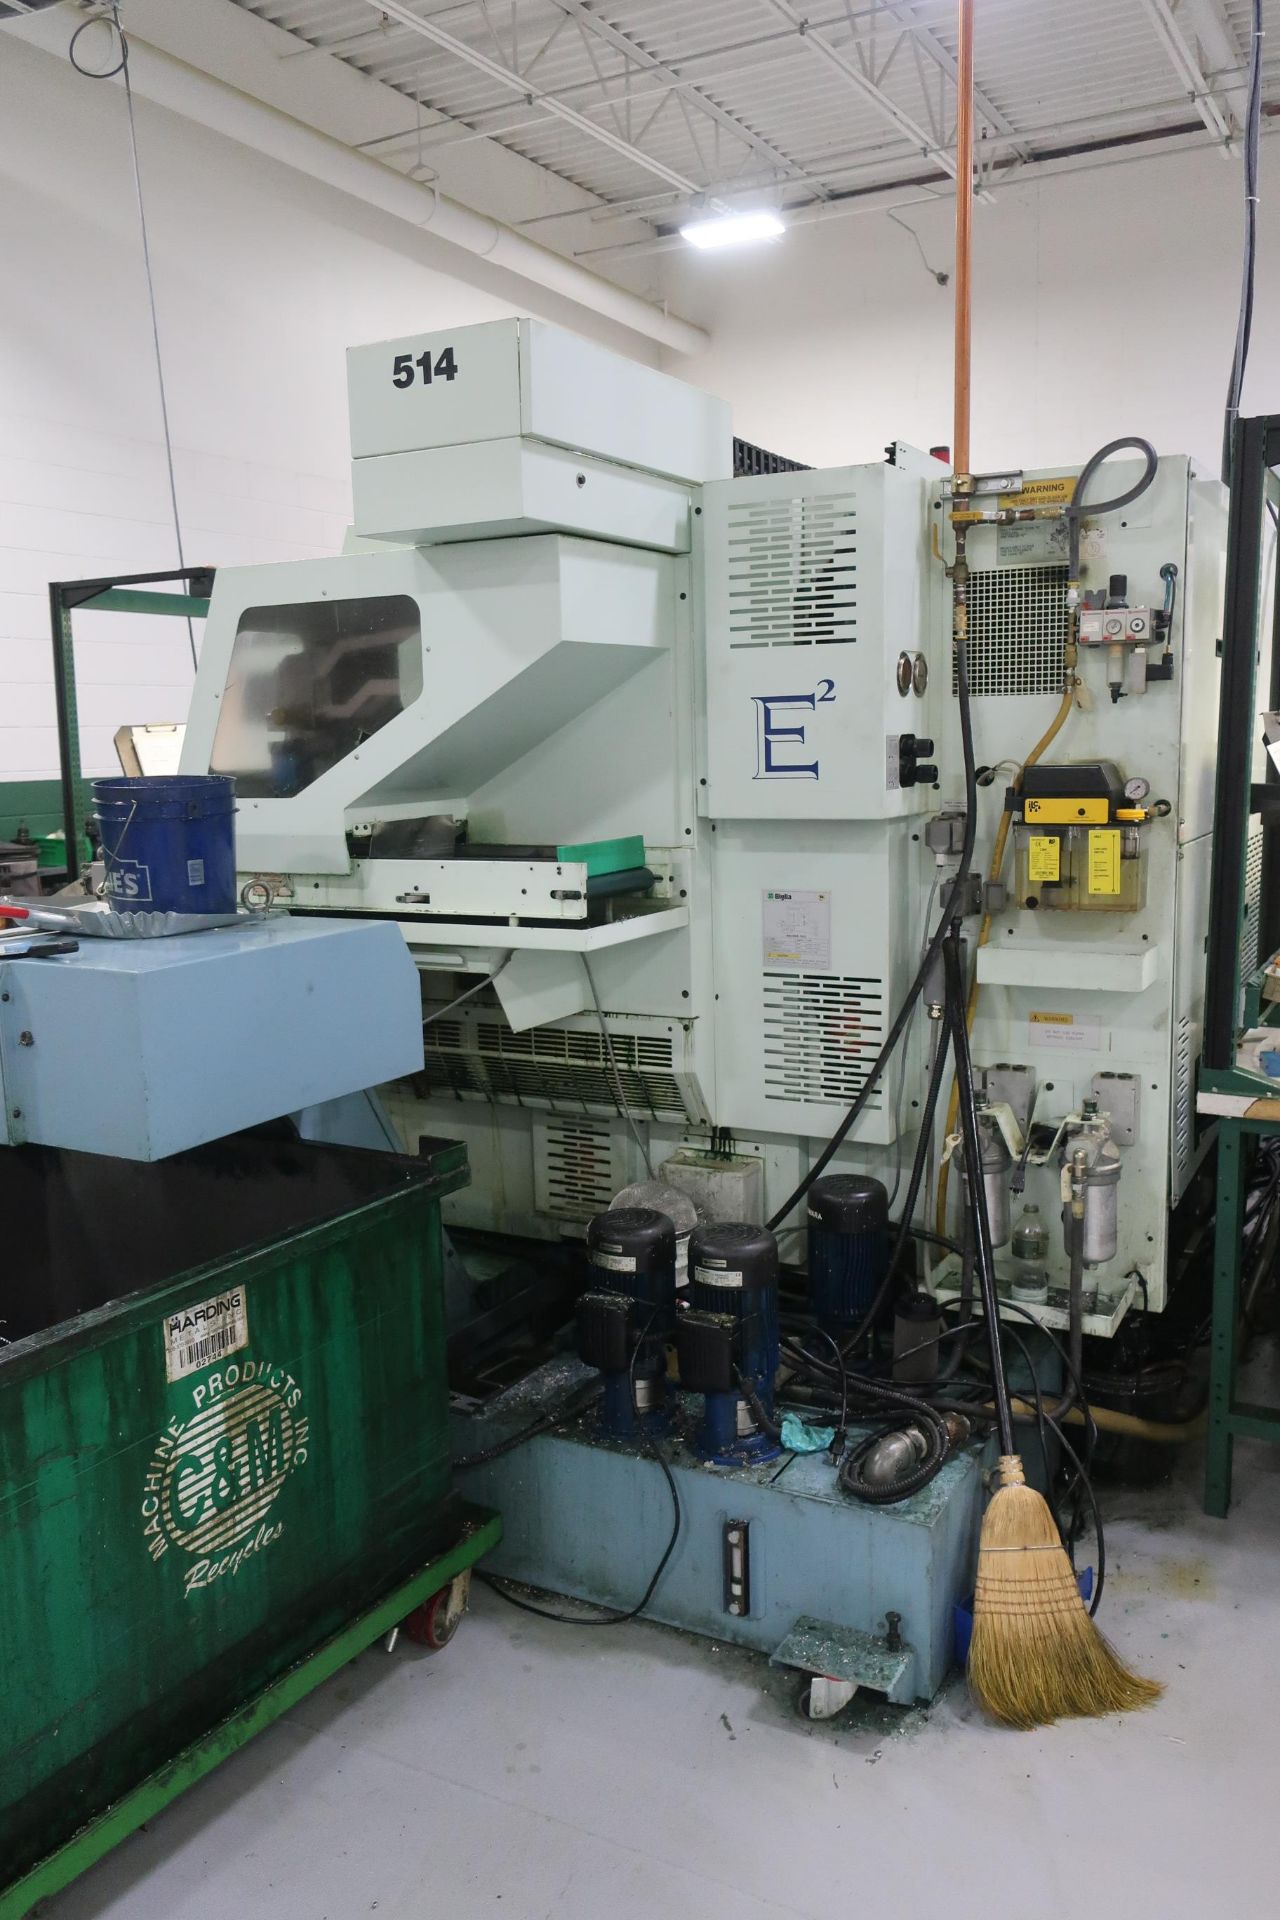 EUROTECH B465 Y2 QUATROFLEX TWIN SPINDLE TWIN TURRET CNC LATHE W/DUAL Y-AXIS, NEW 2011, SN 11045 - Image 10 of 19